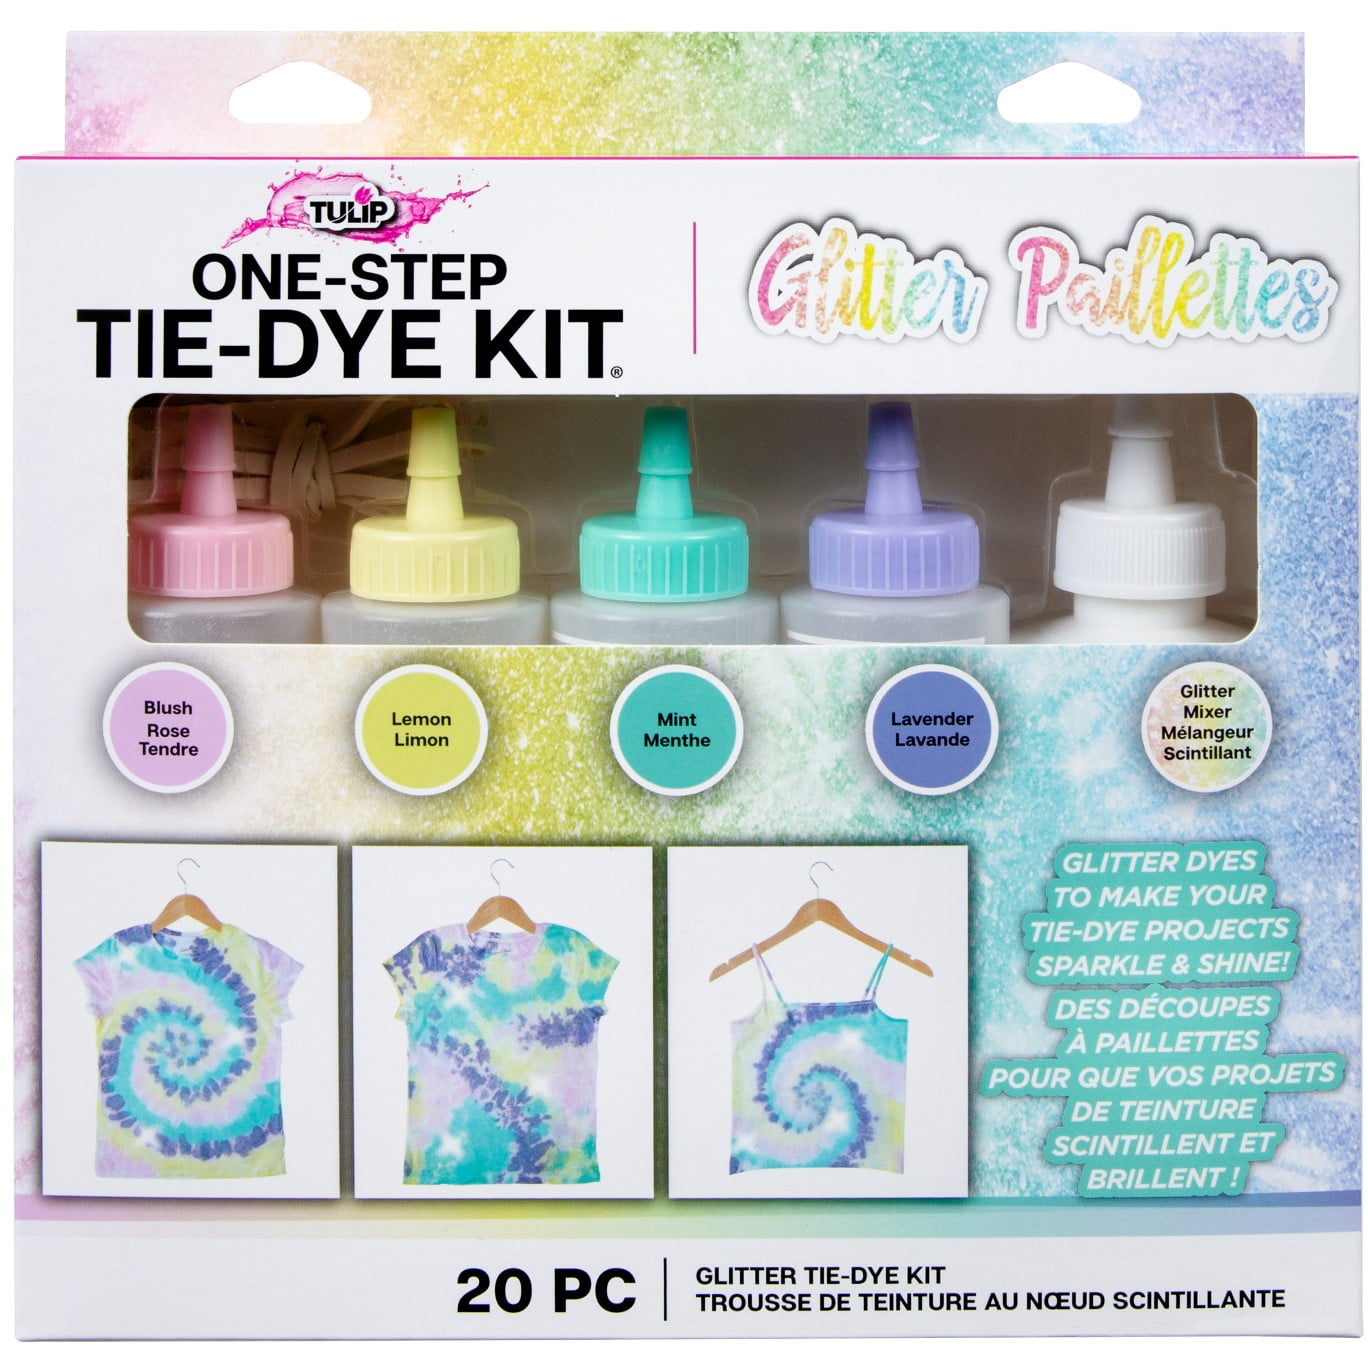 TIE DYE KIT TULIP One-Step 23-Colors 145 Piece Set Kids Adults Party Crafts  Fun